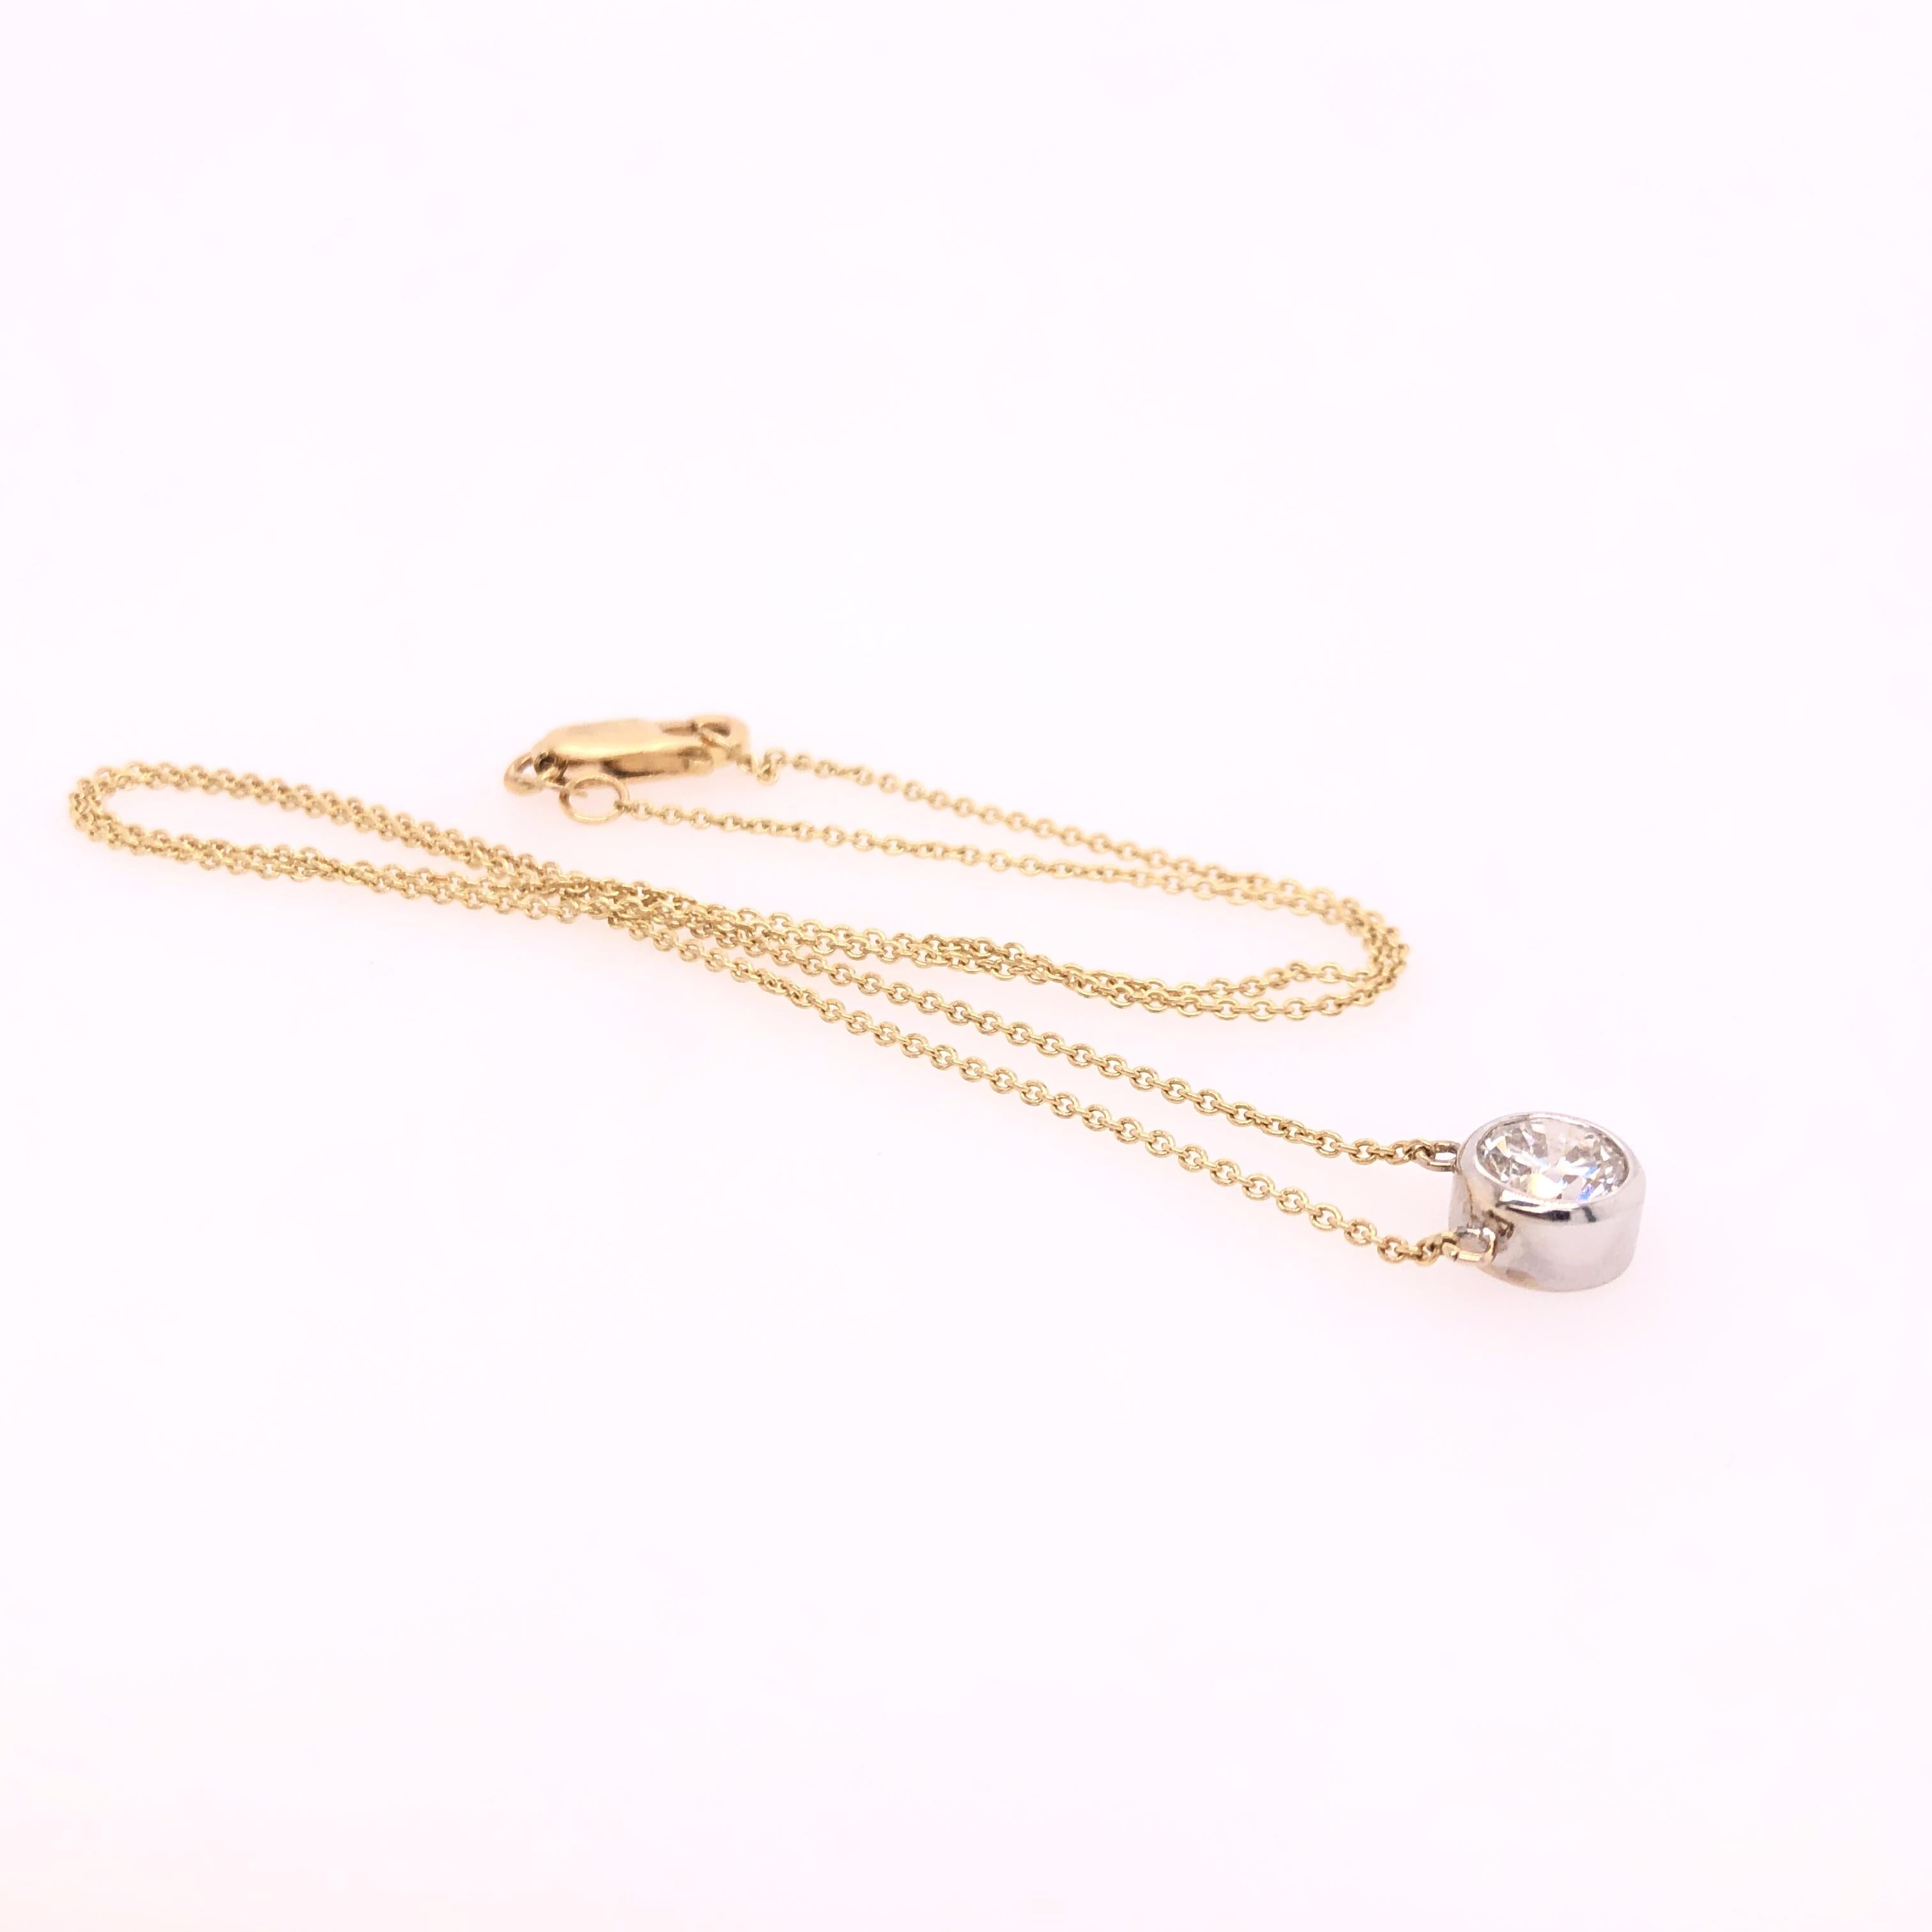 Round Cut Bezel Set Diamond in White Gold with Yellow Gold Chain